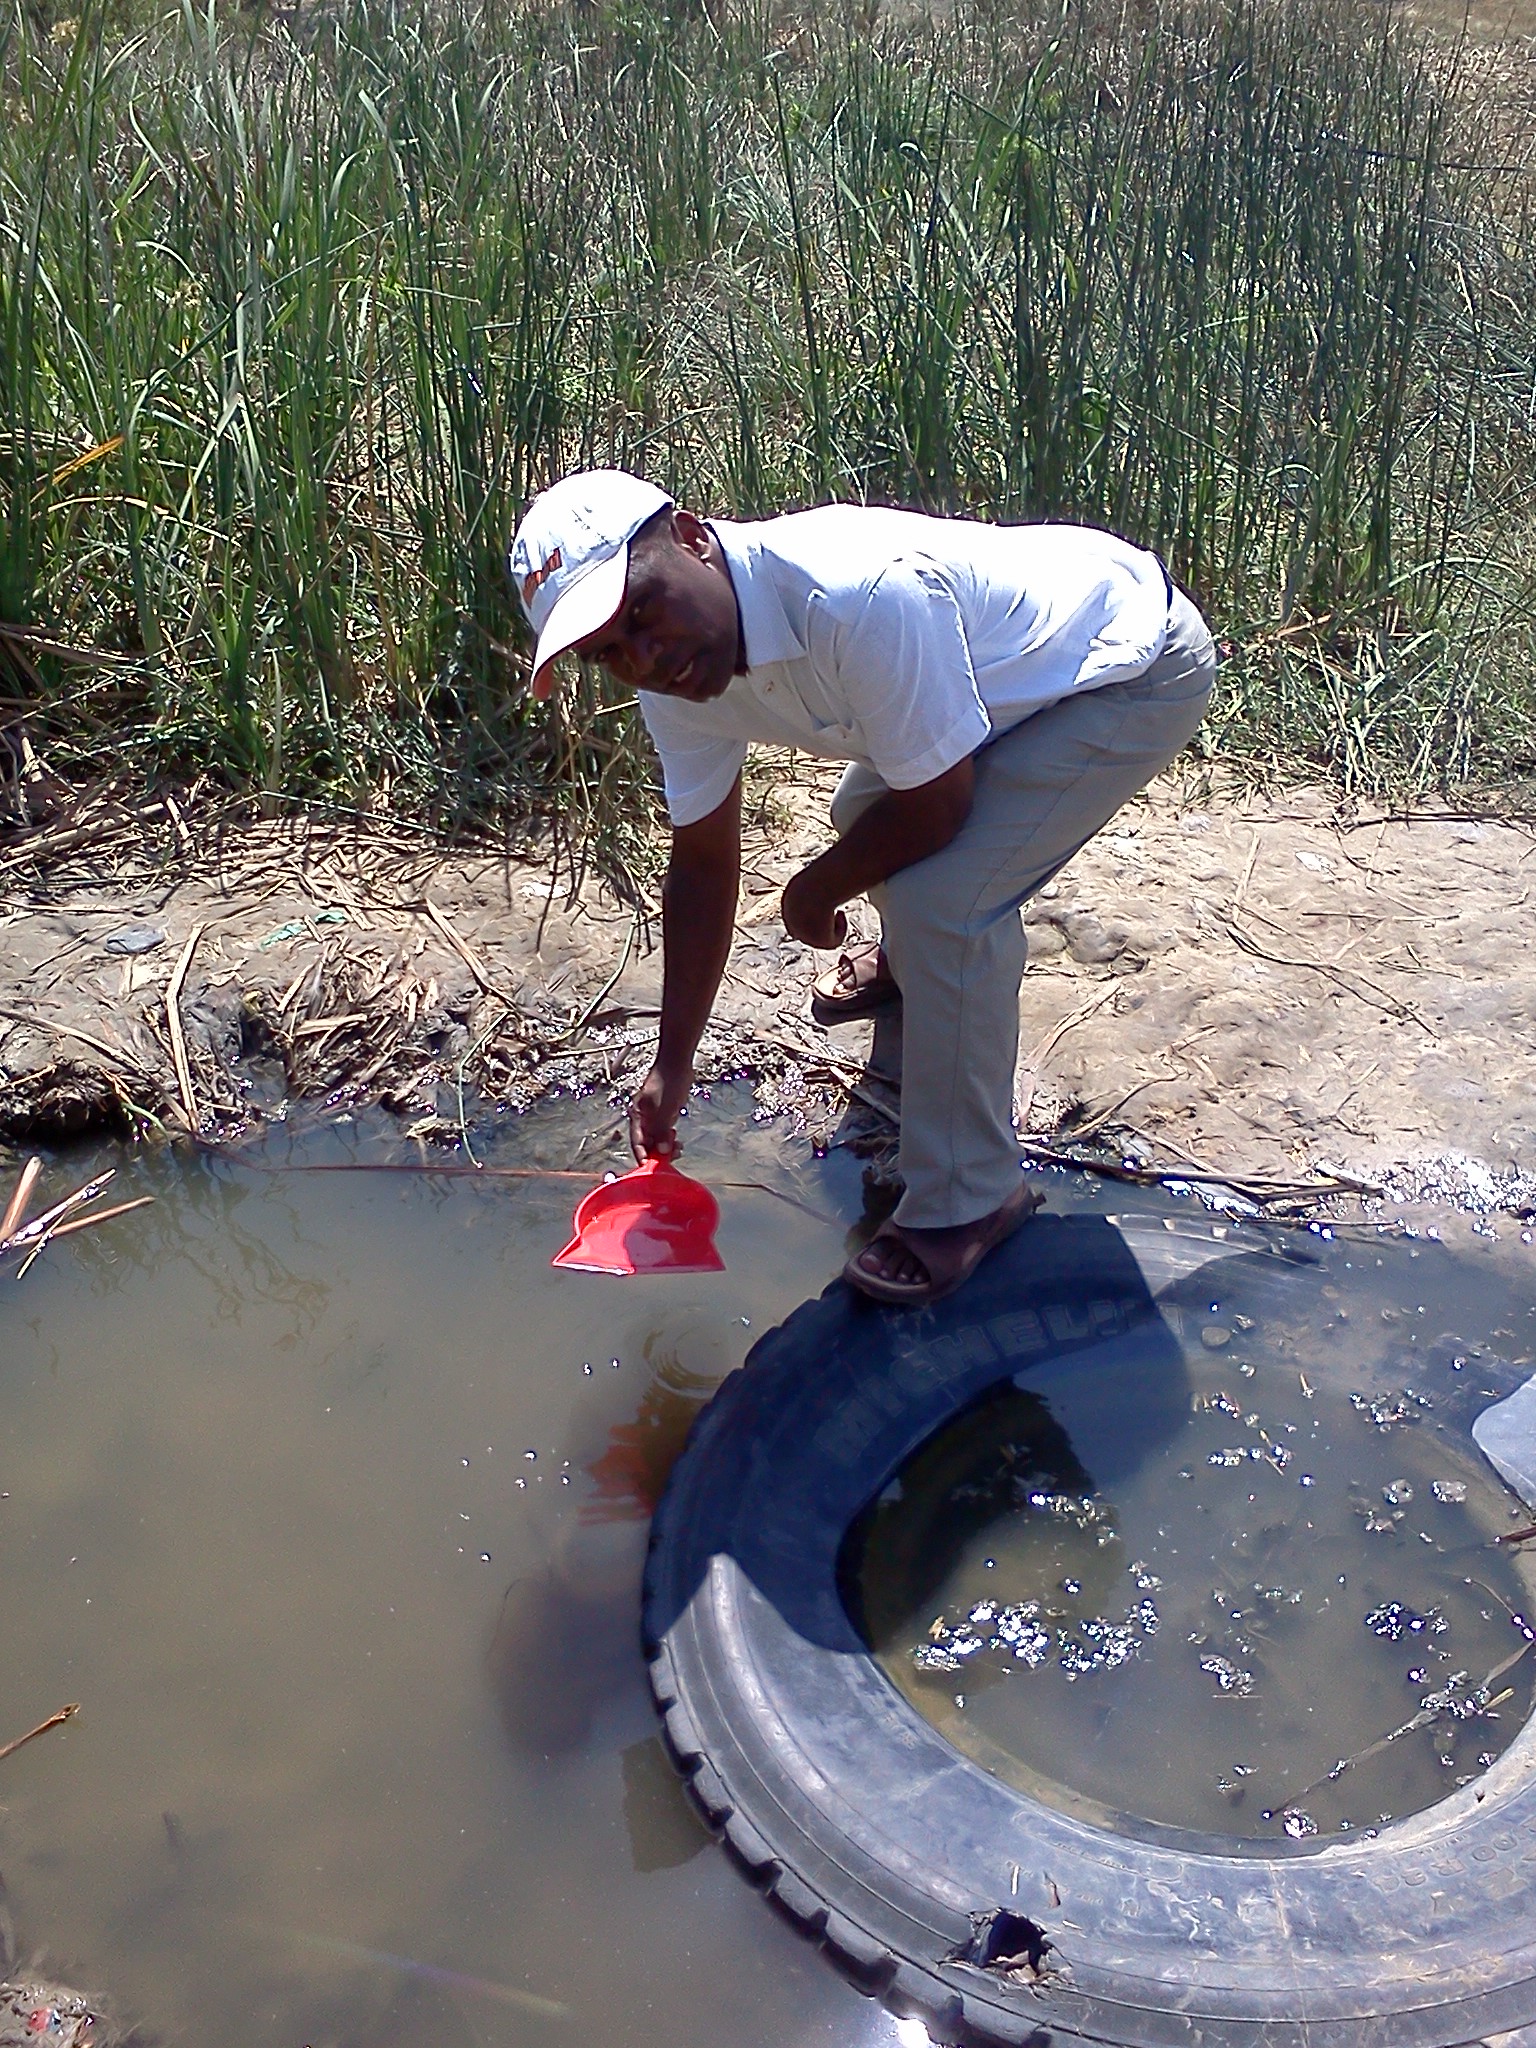 Bernards Okeyo from Eco-Ethics International collecting water samples from the study area